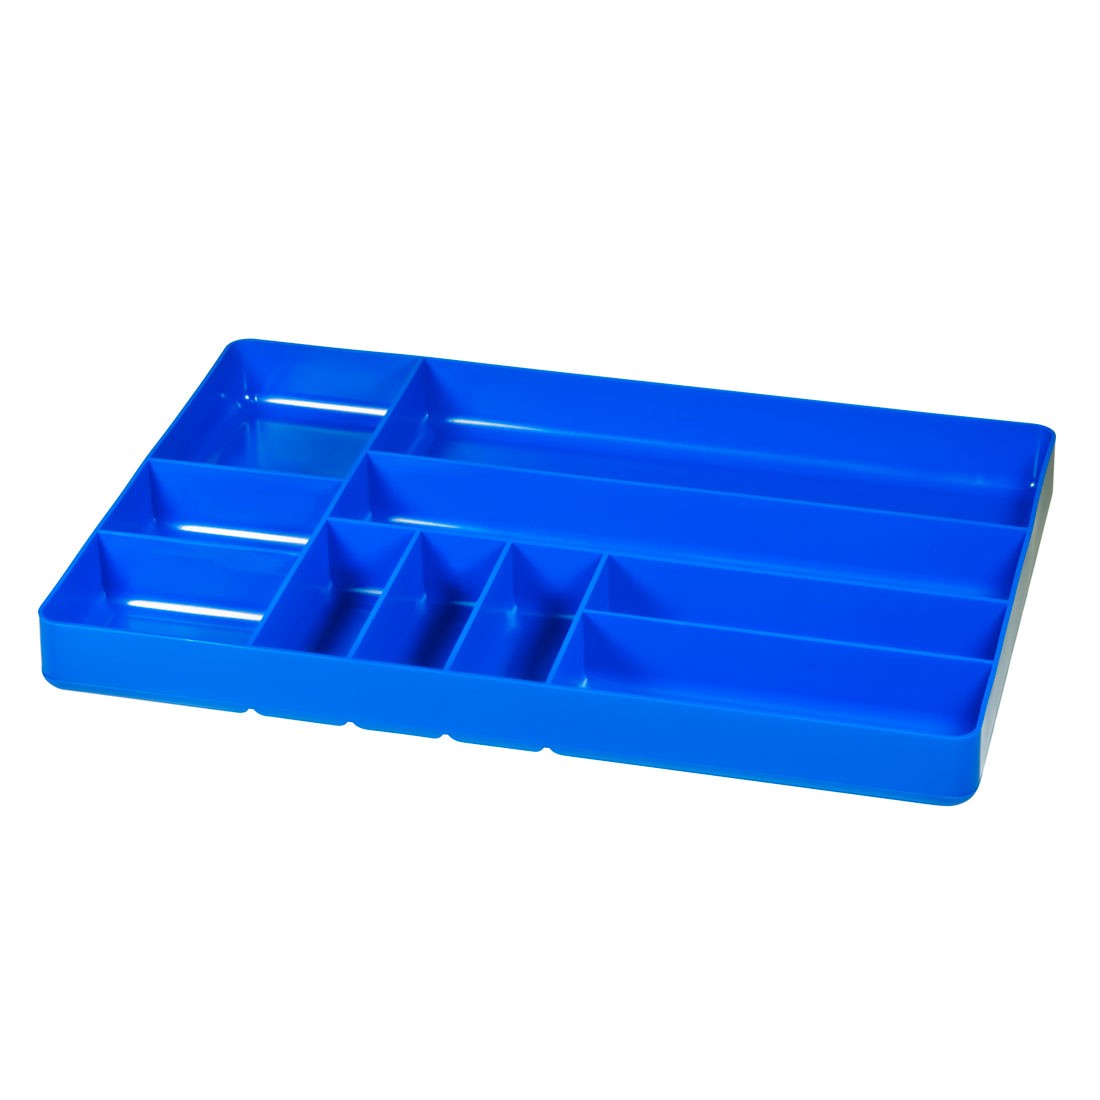 http://www.ernstmfg.com/shared/images/product/5012_ten-compartment-organizer-tray_blue-1100_1.jpg